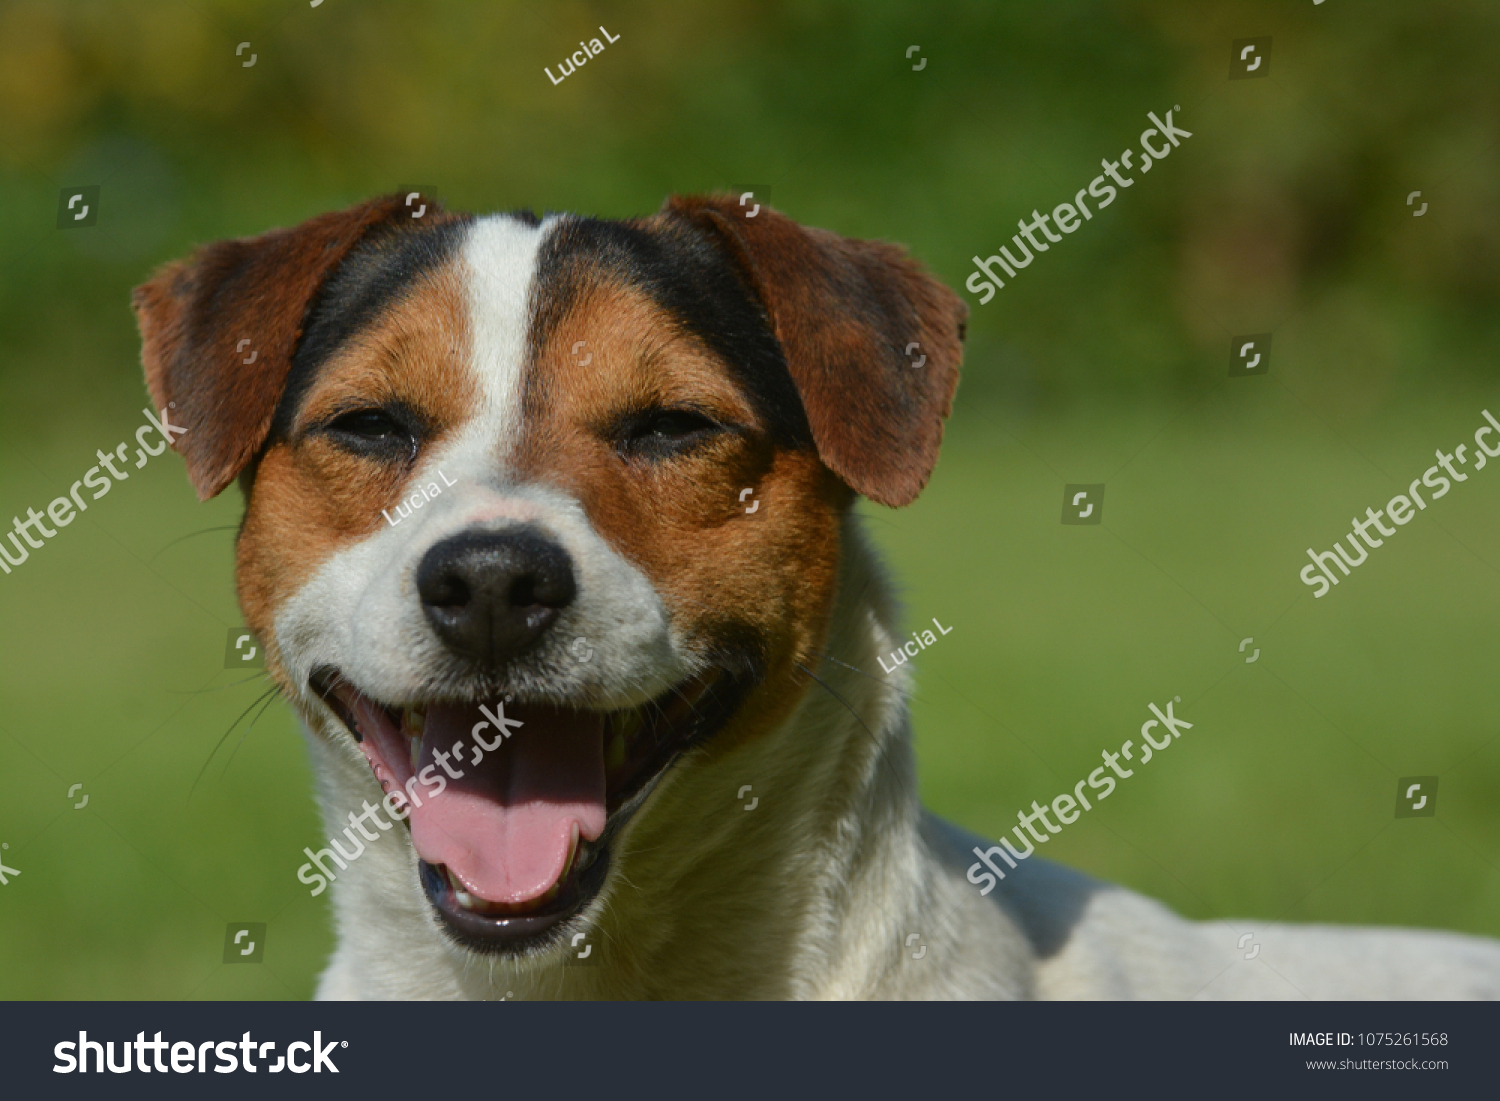 Jack Russell Terrier Black Tan Mask Stock Photo Edit Now 1075261568